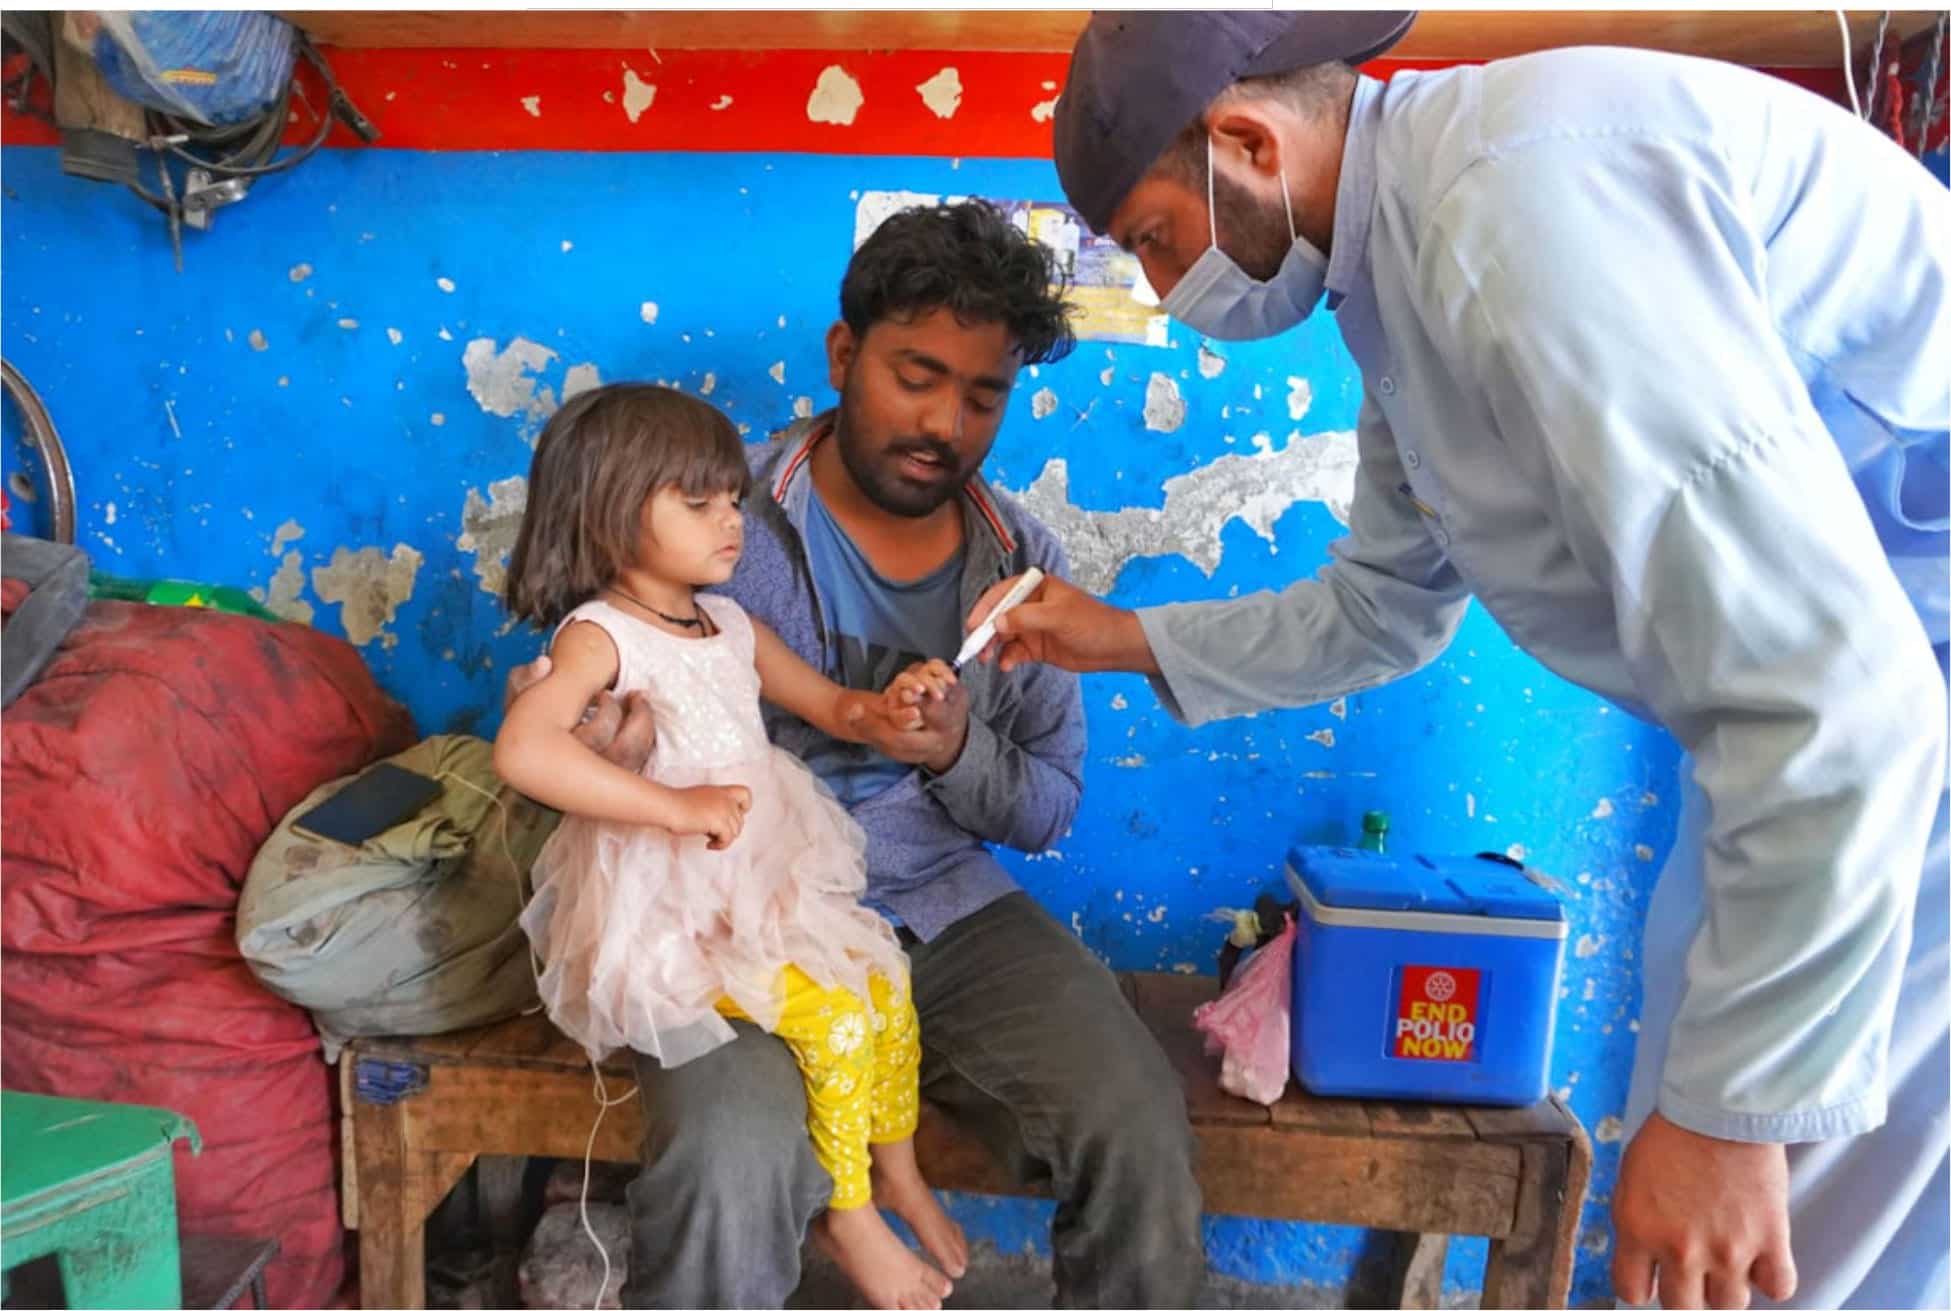 A vaccinator marking a vaccinated child